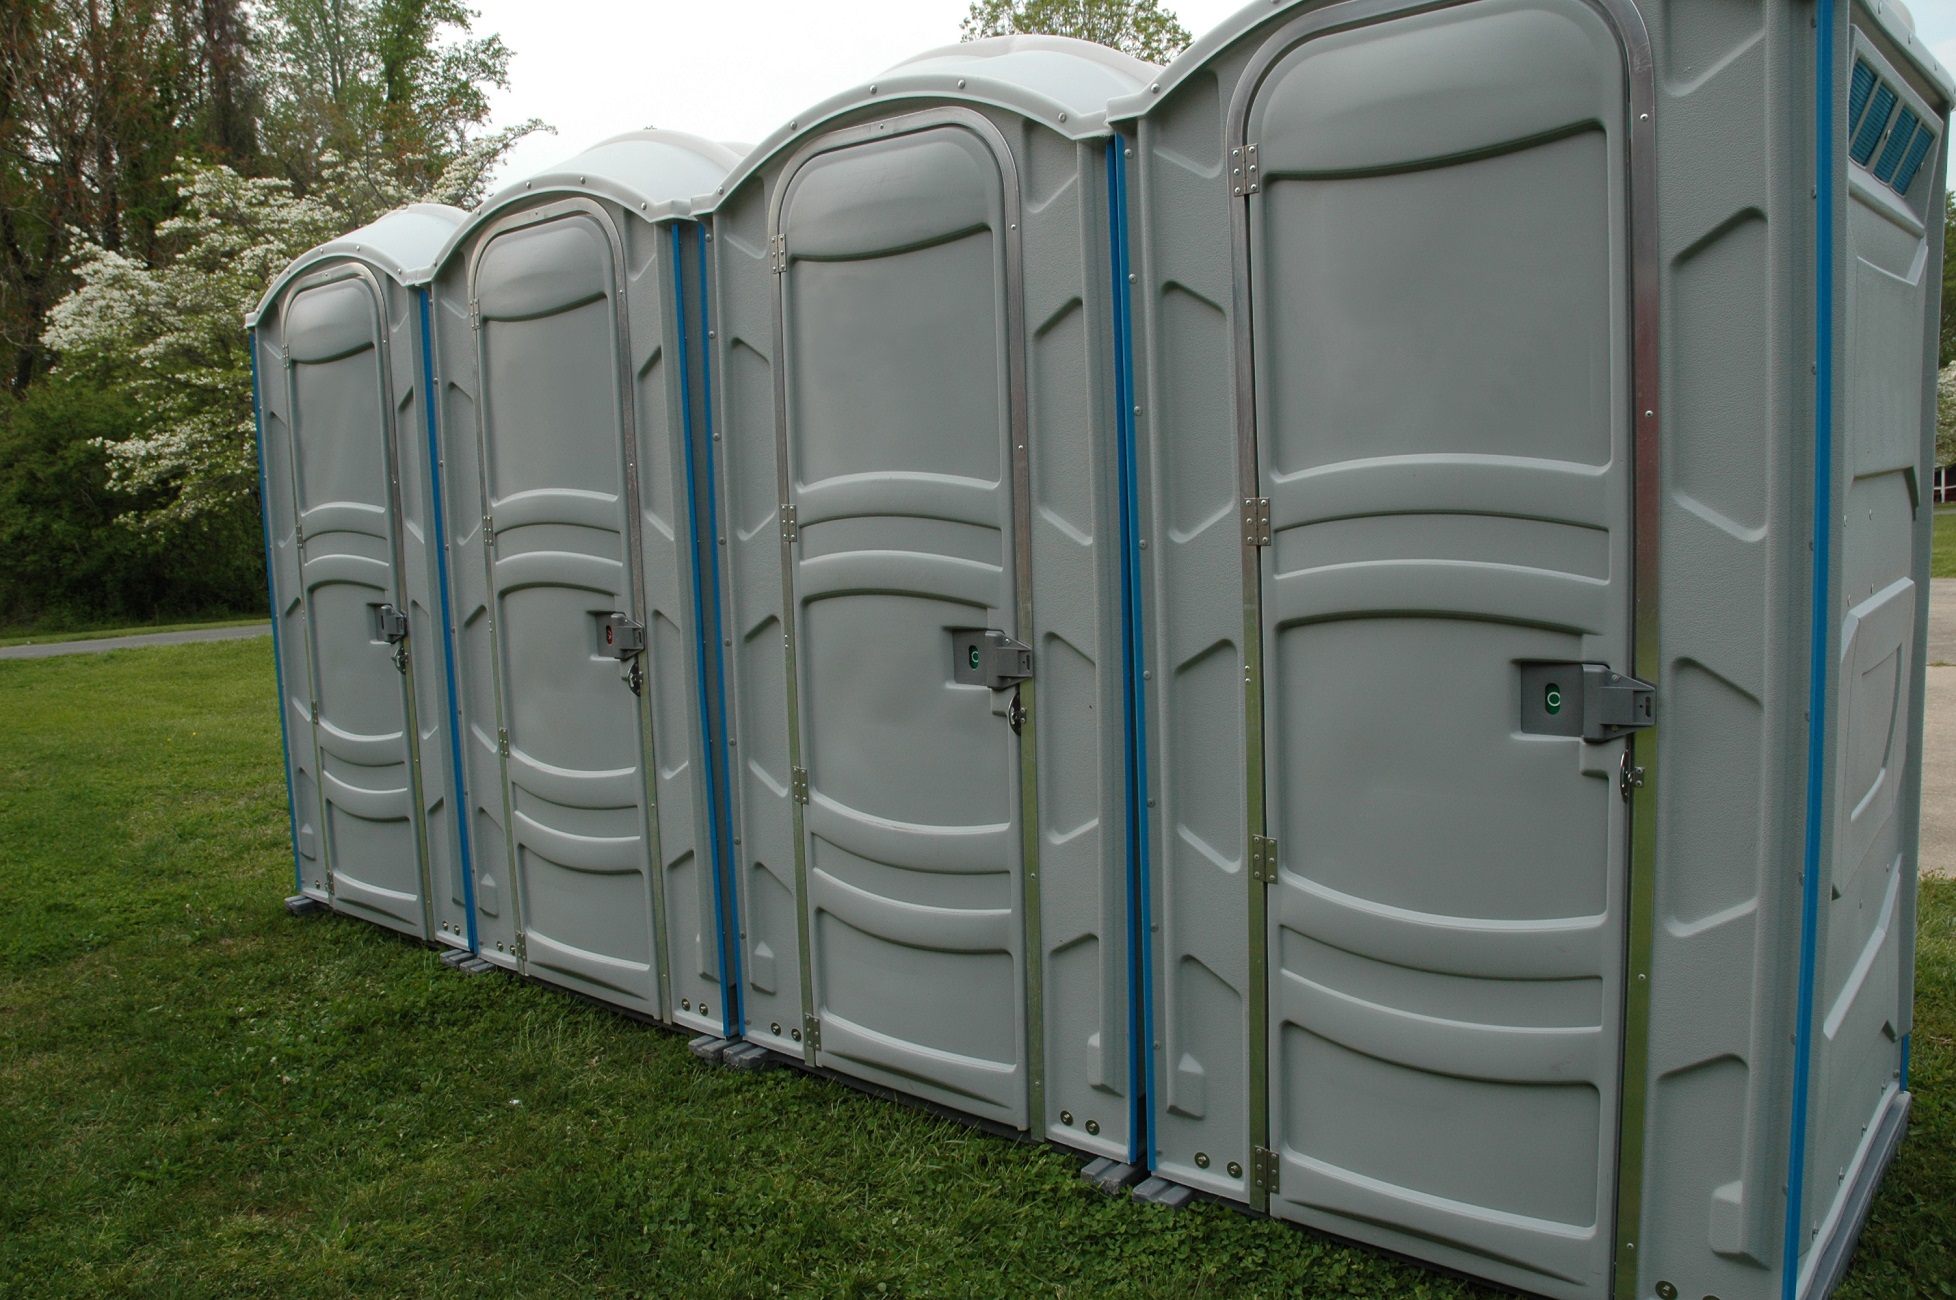 Ways You Can Grow Your Creativity Using PORTABLE TOILET